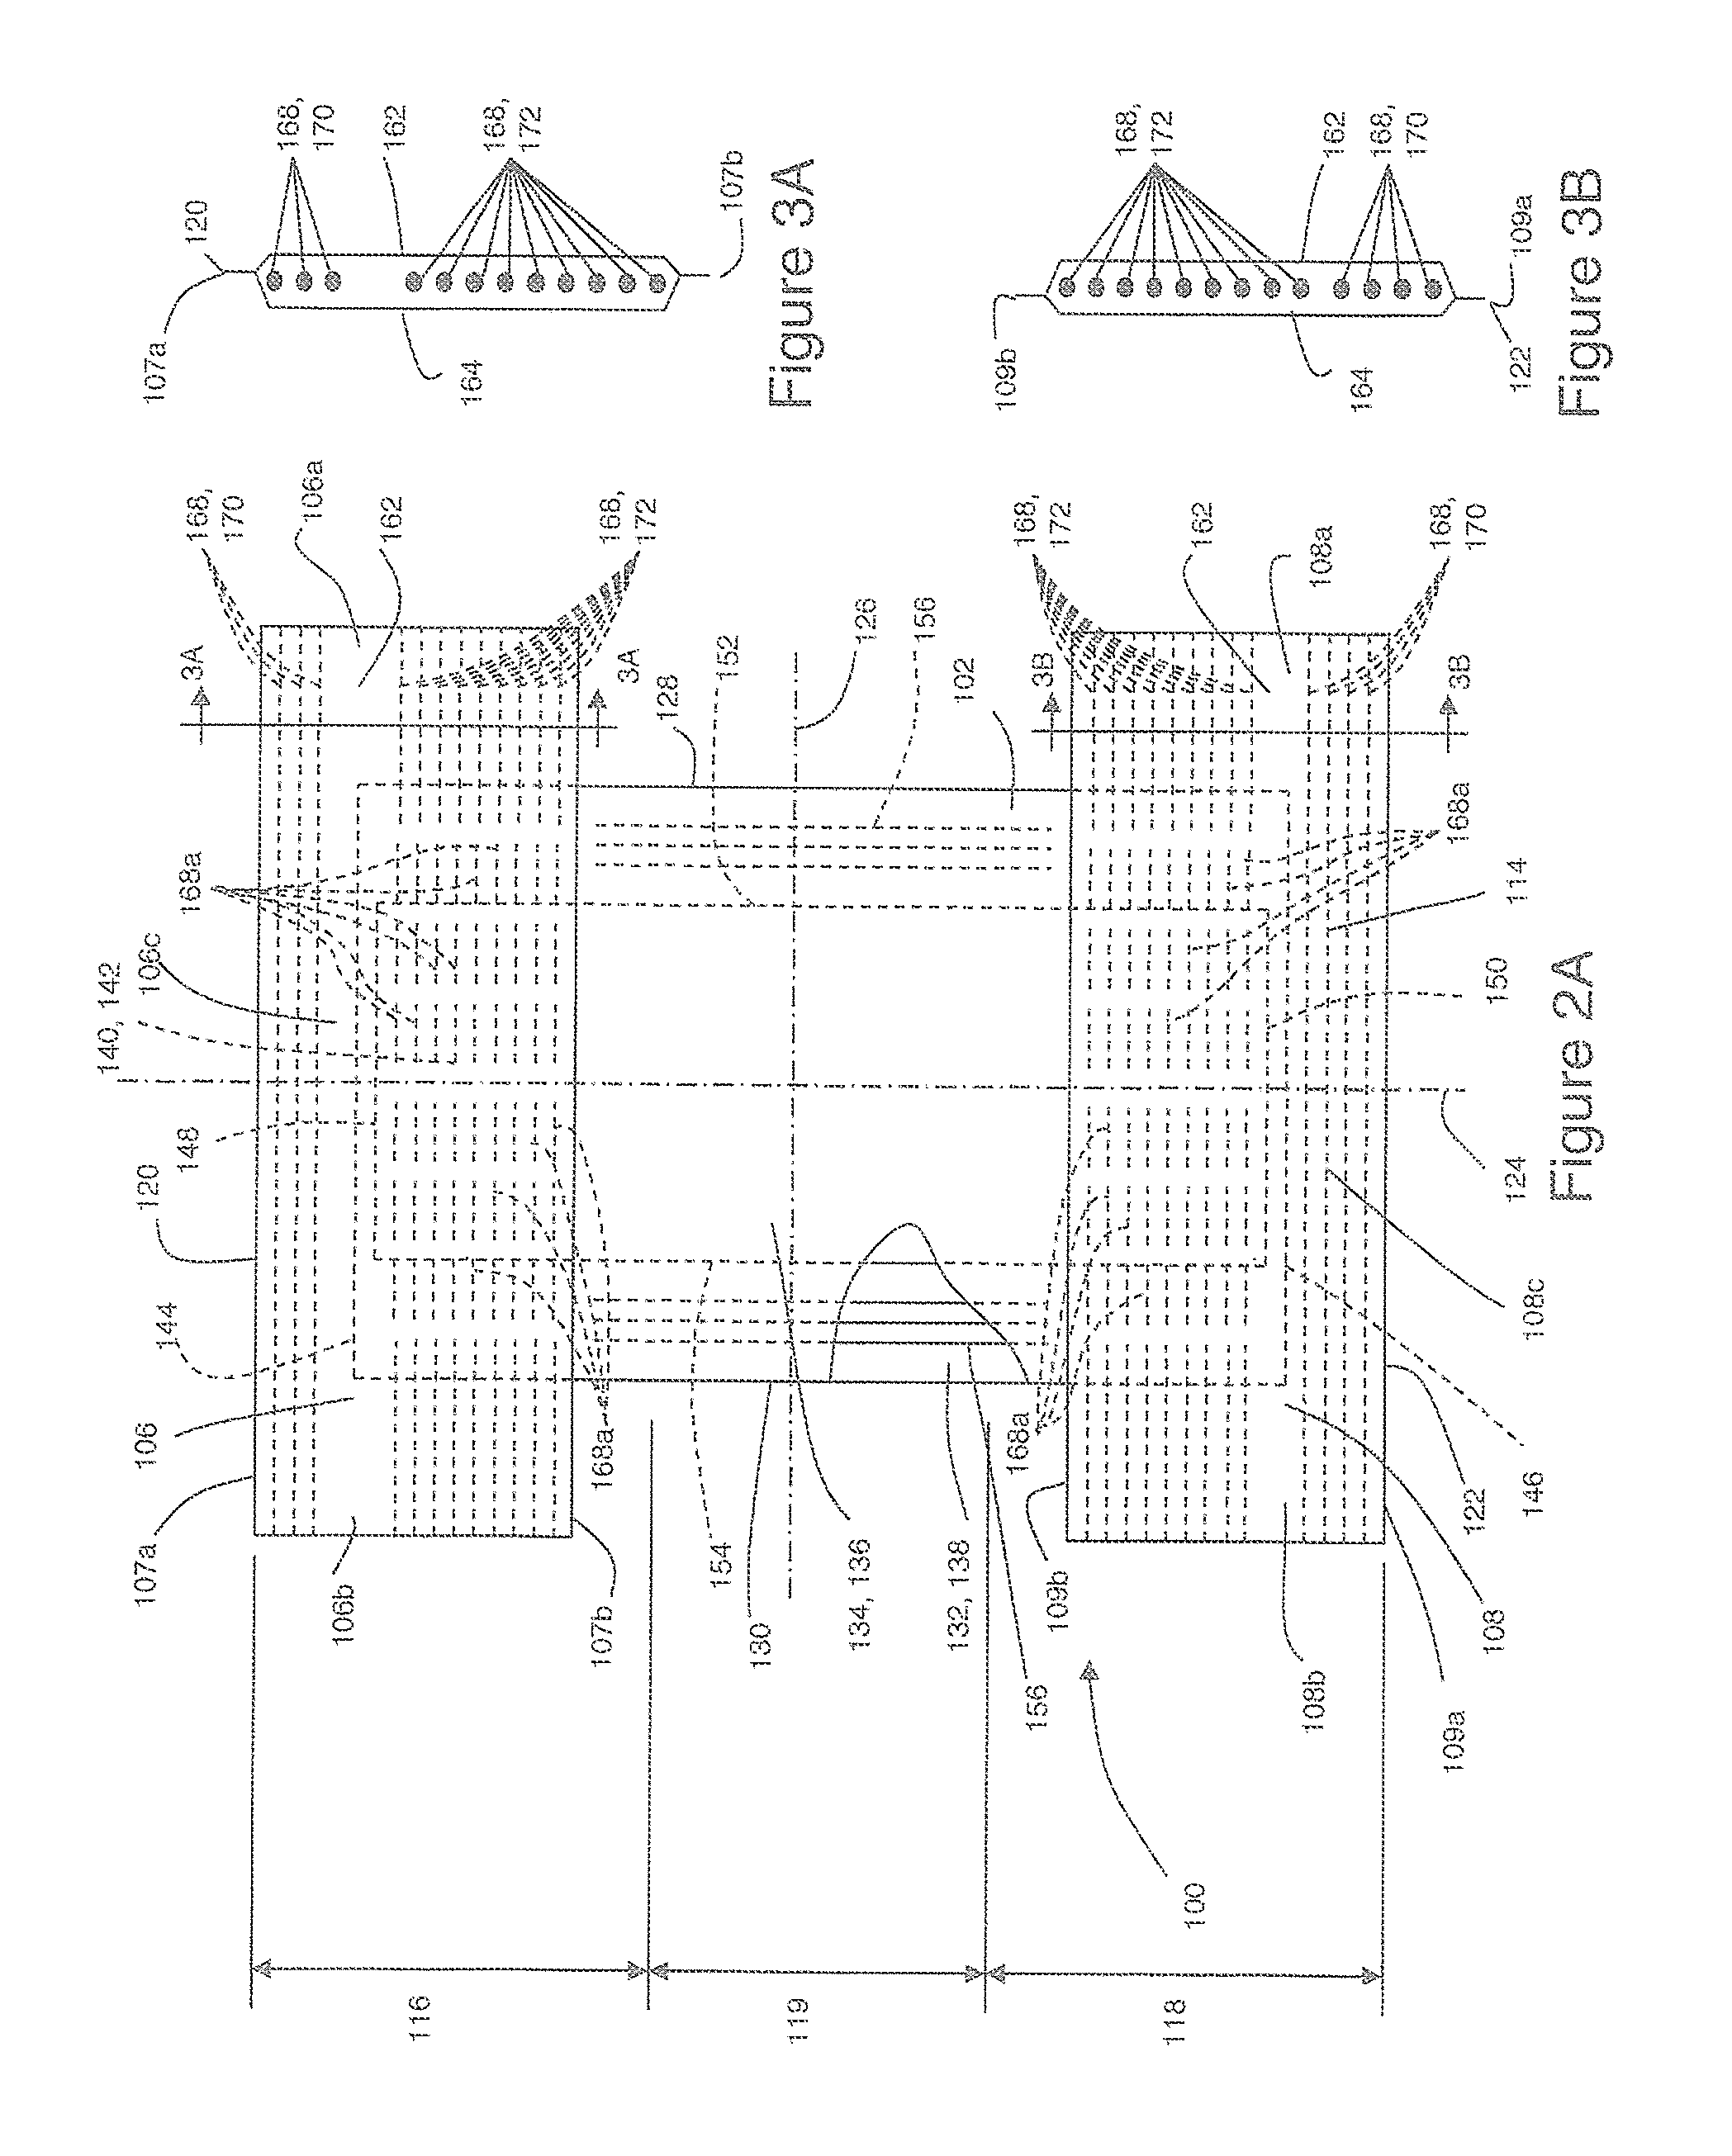 Apparatuses and Methods for Making Absorbent Articles